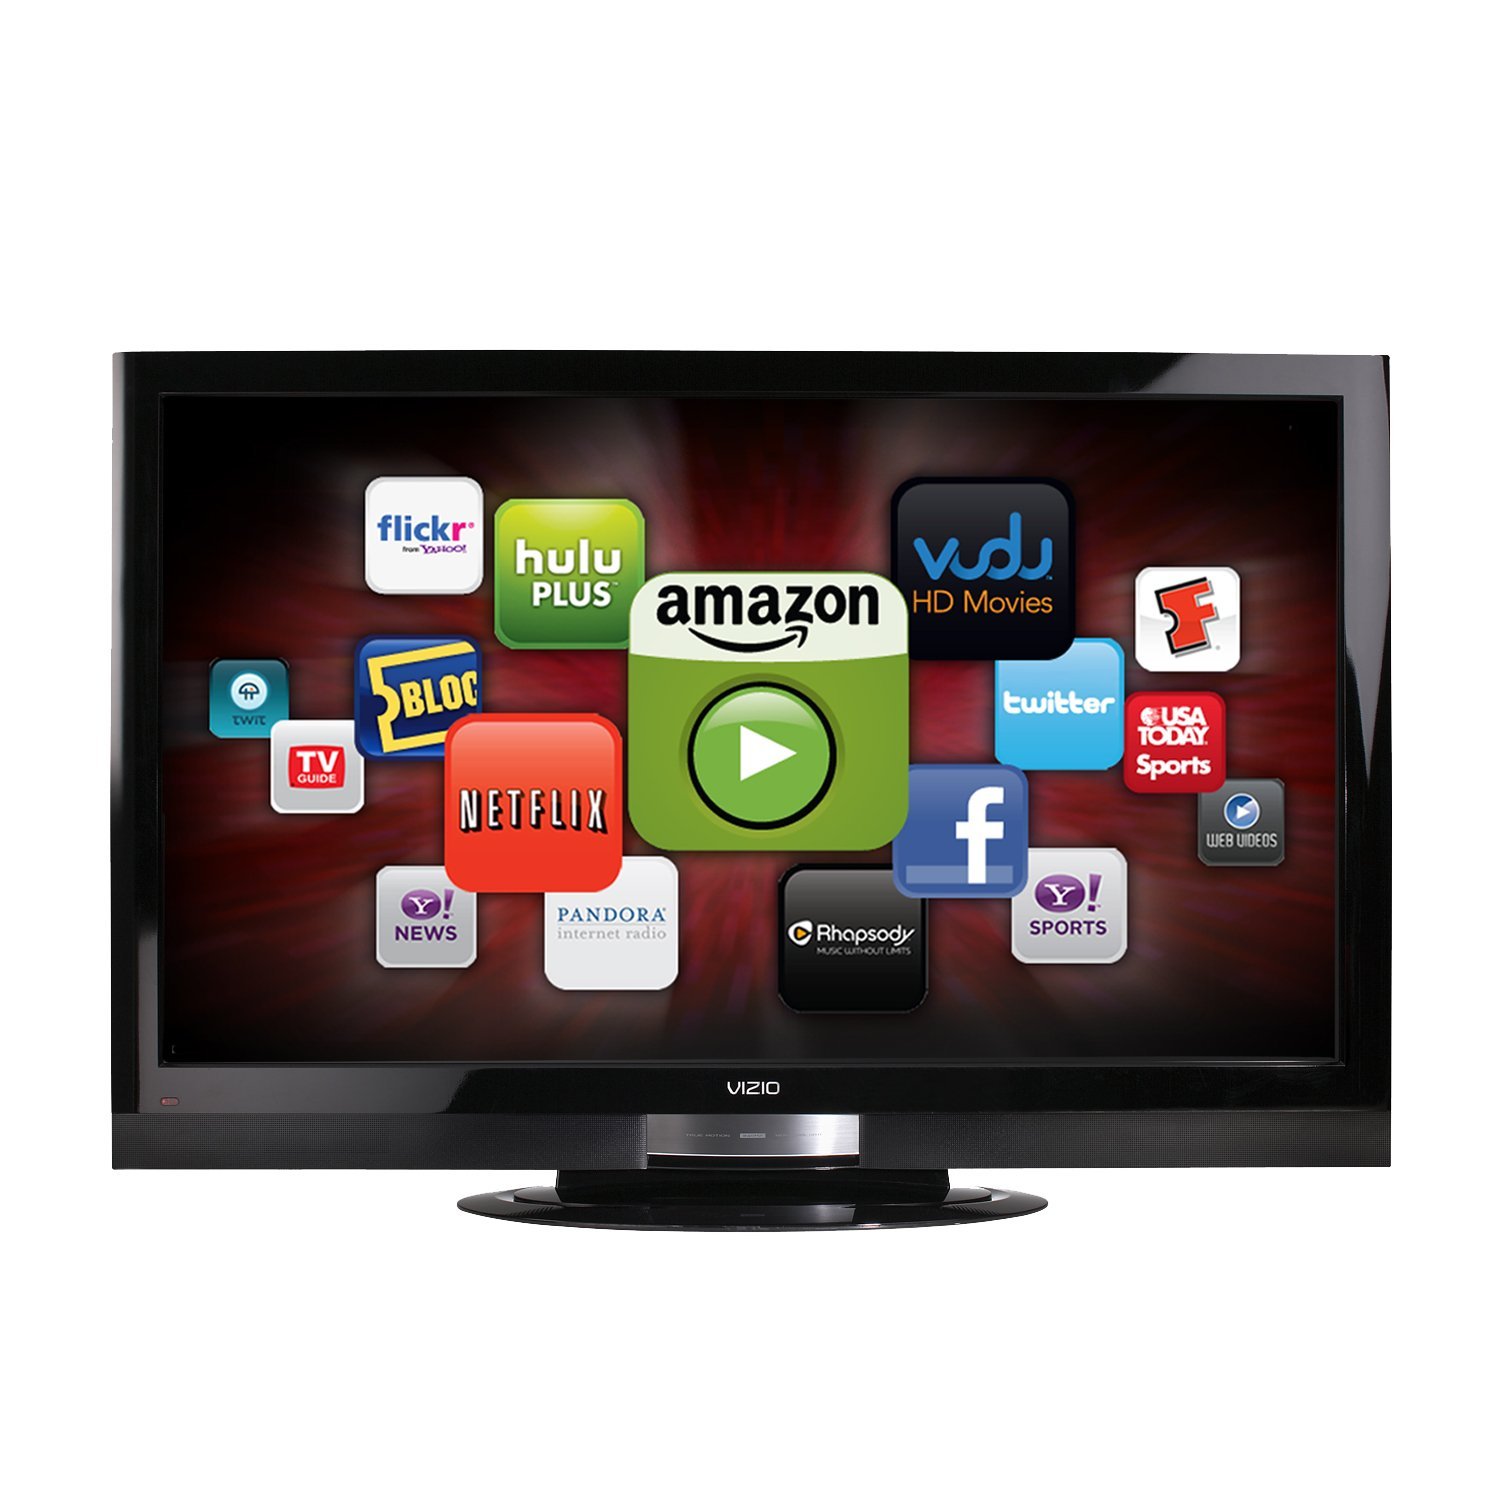 http://thetechjournal.com/wp-content/uploads/images/1108/1314100482-vizio-xvt323sv-32inch-full-hd-1080p-led-lcd-hdtv-with-via-internet-application-1.jpg